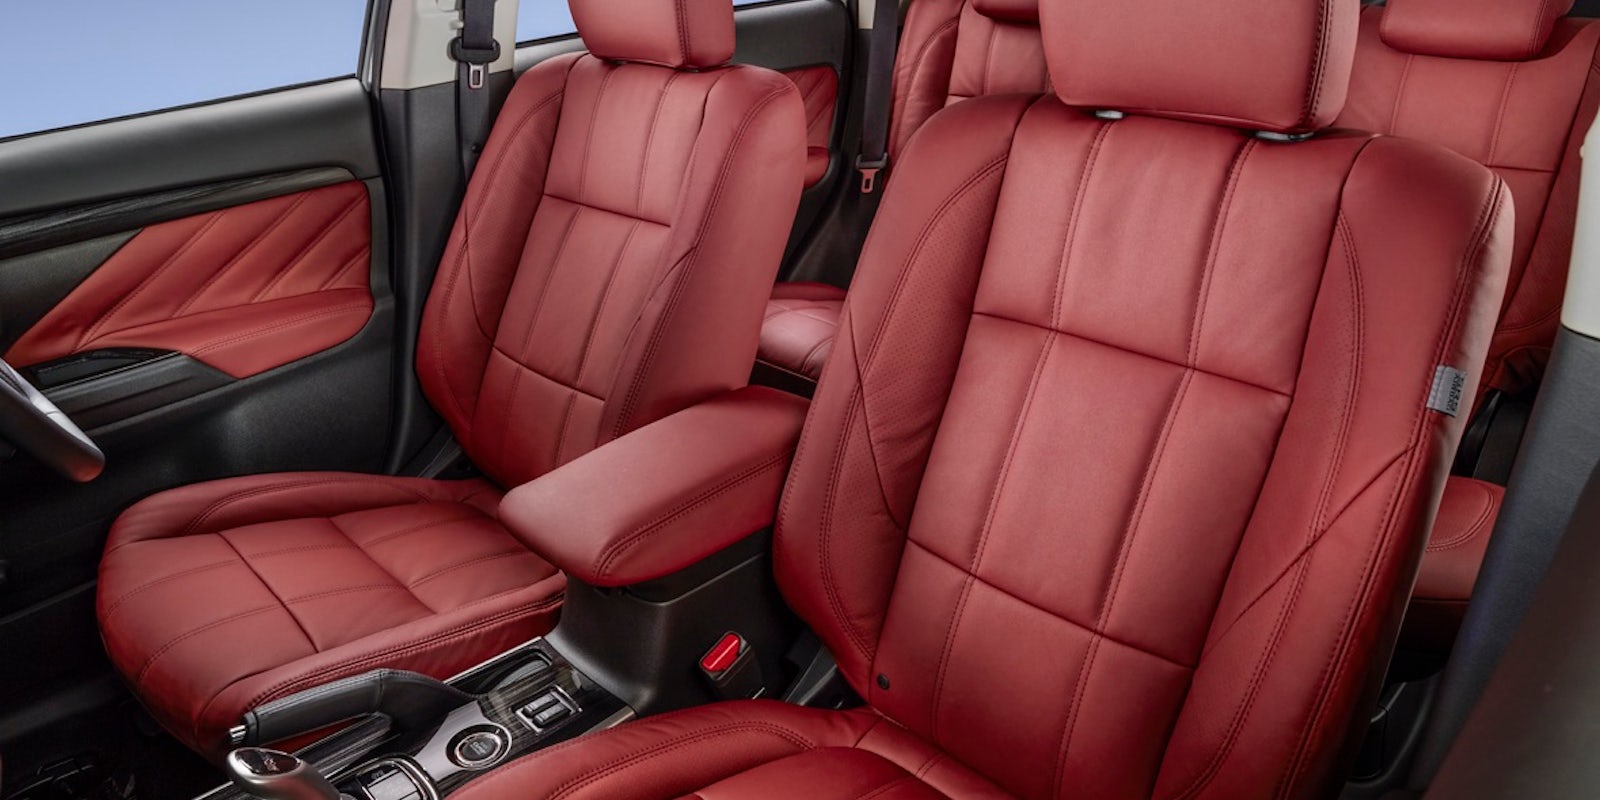 The interior is certainly practical, but there's nothing all that exciting to look at